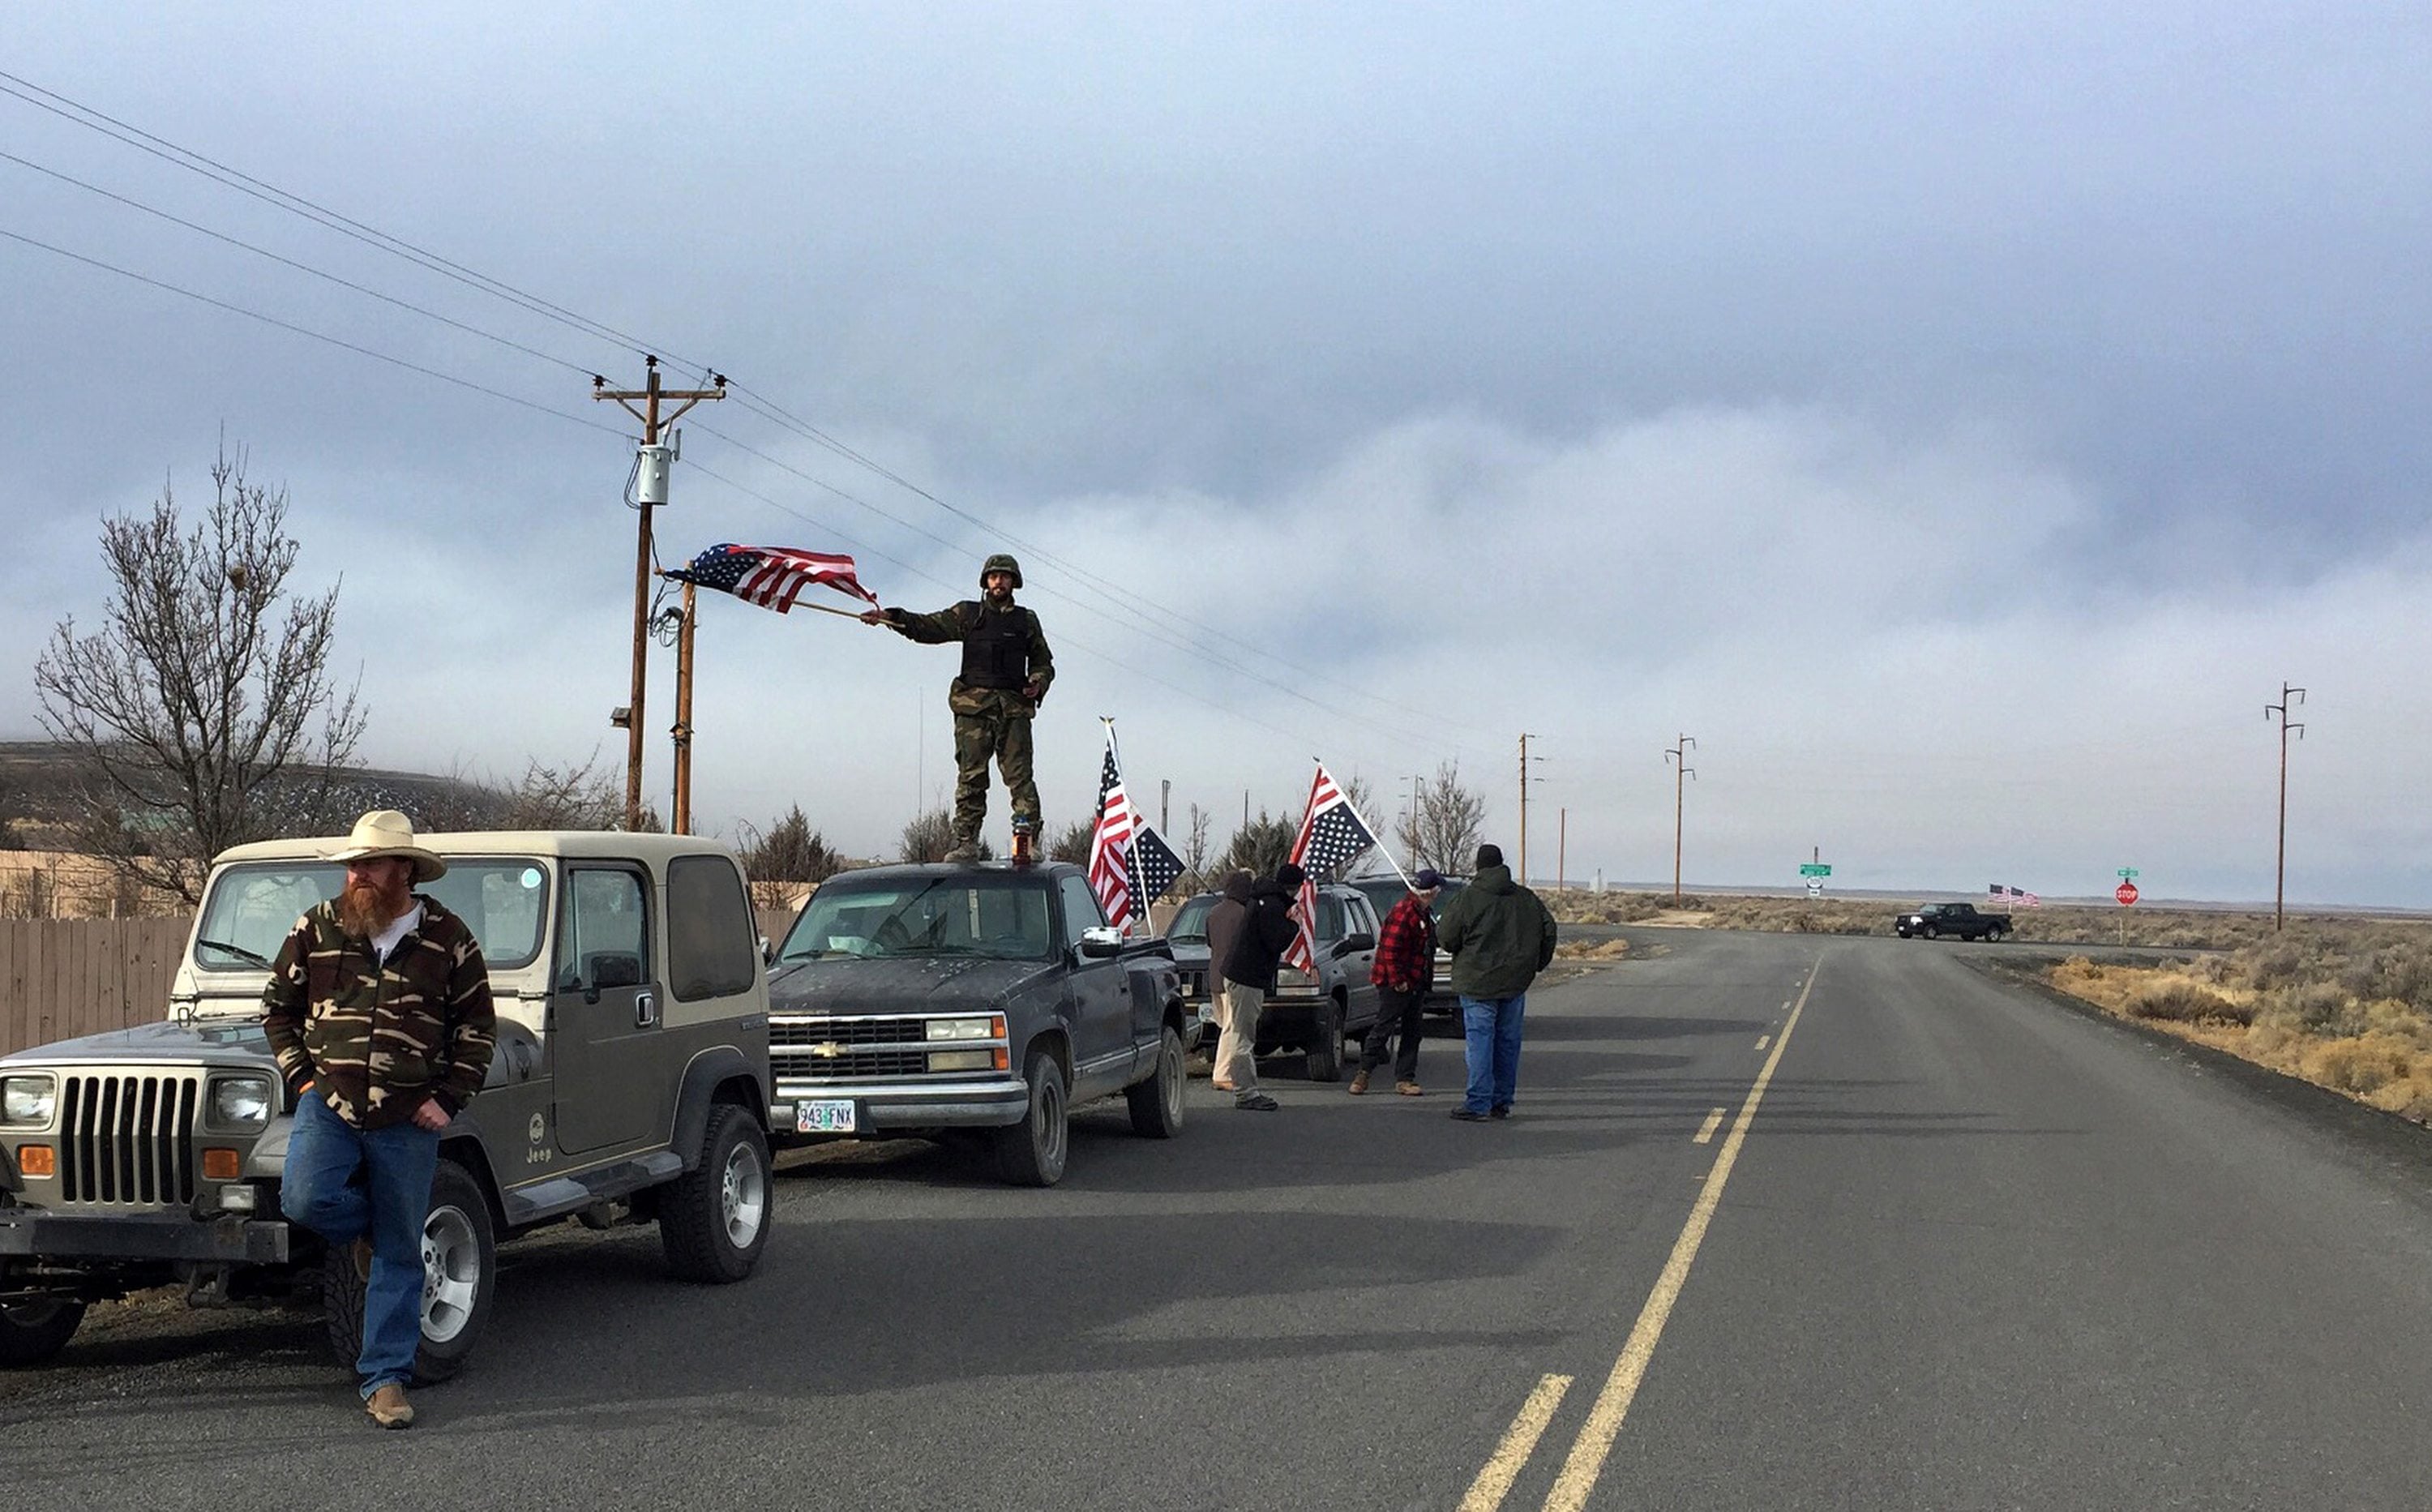 People wave American flags near the Malheur National Wildlife Refuge on Thursday near Burns, Ore. The last four armed occupiers of the national wildlife refuge in eastern Oregon said they would turn themselves in Thursday morning, after law officers surrounded them in a tense standoff.